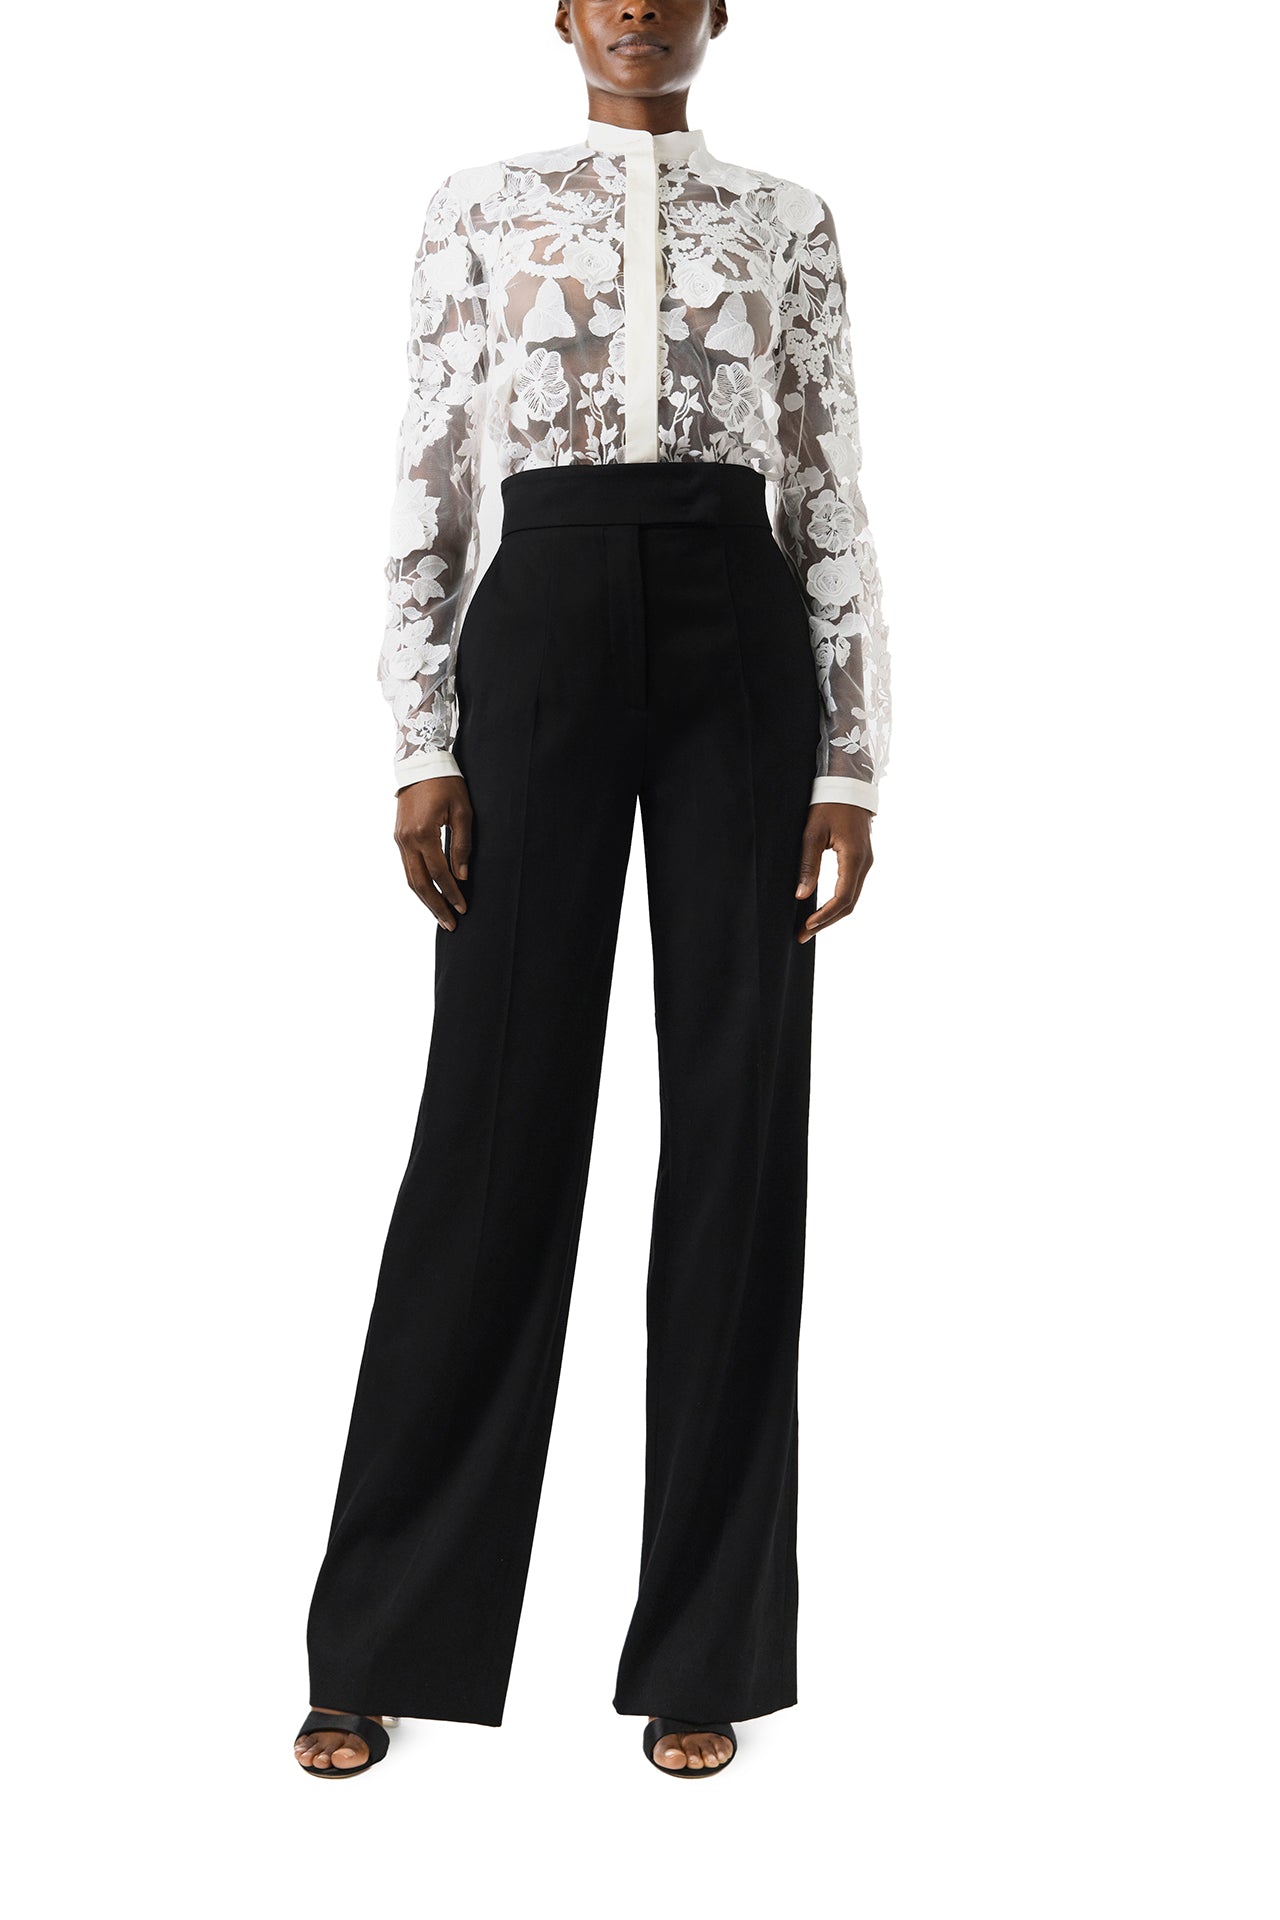 Monique Lhuillier Fall 2024 button front sheer lace blouse in Silk White 3D lace - front.